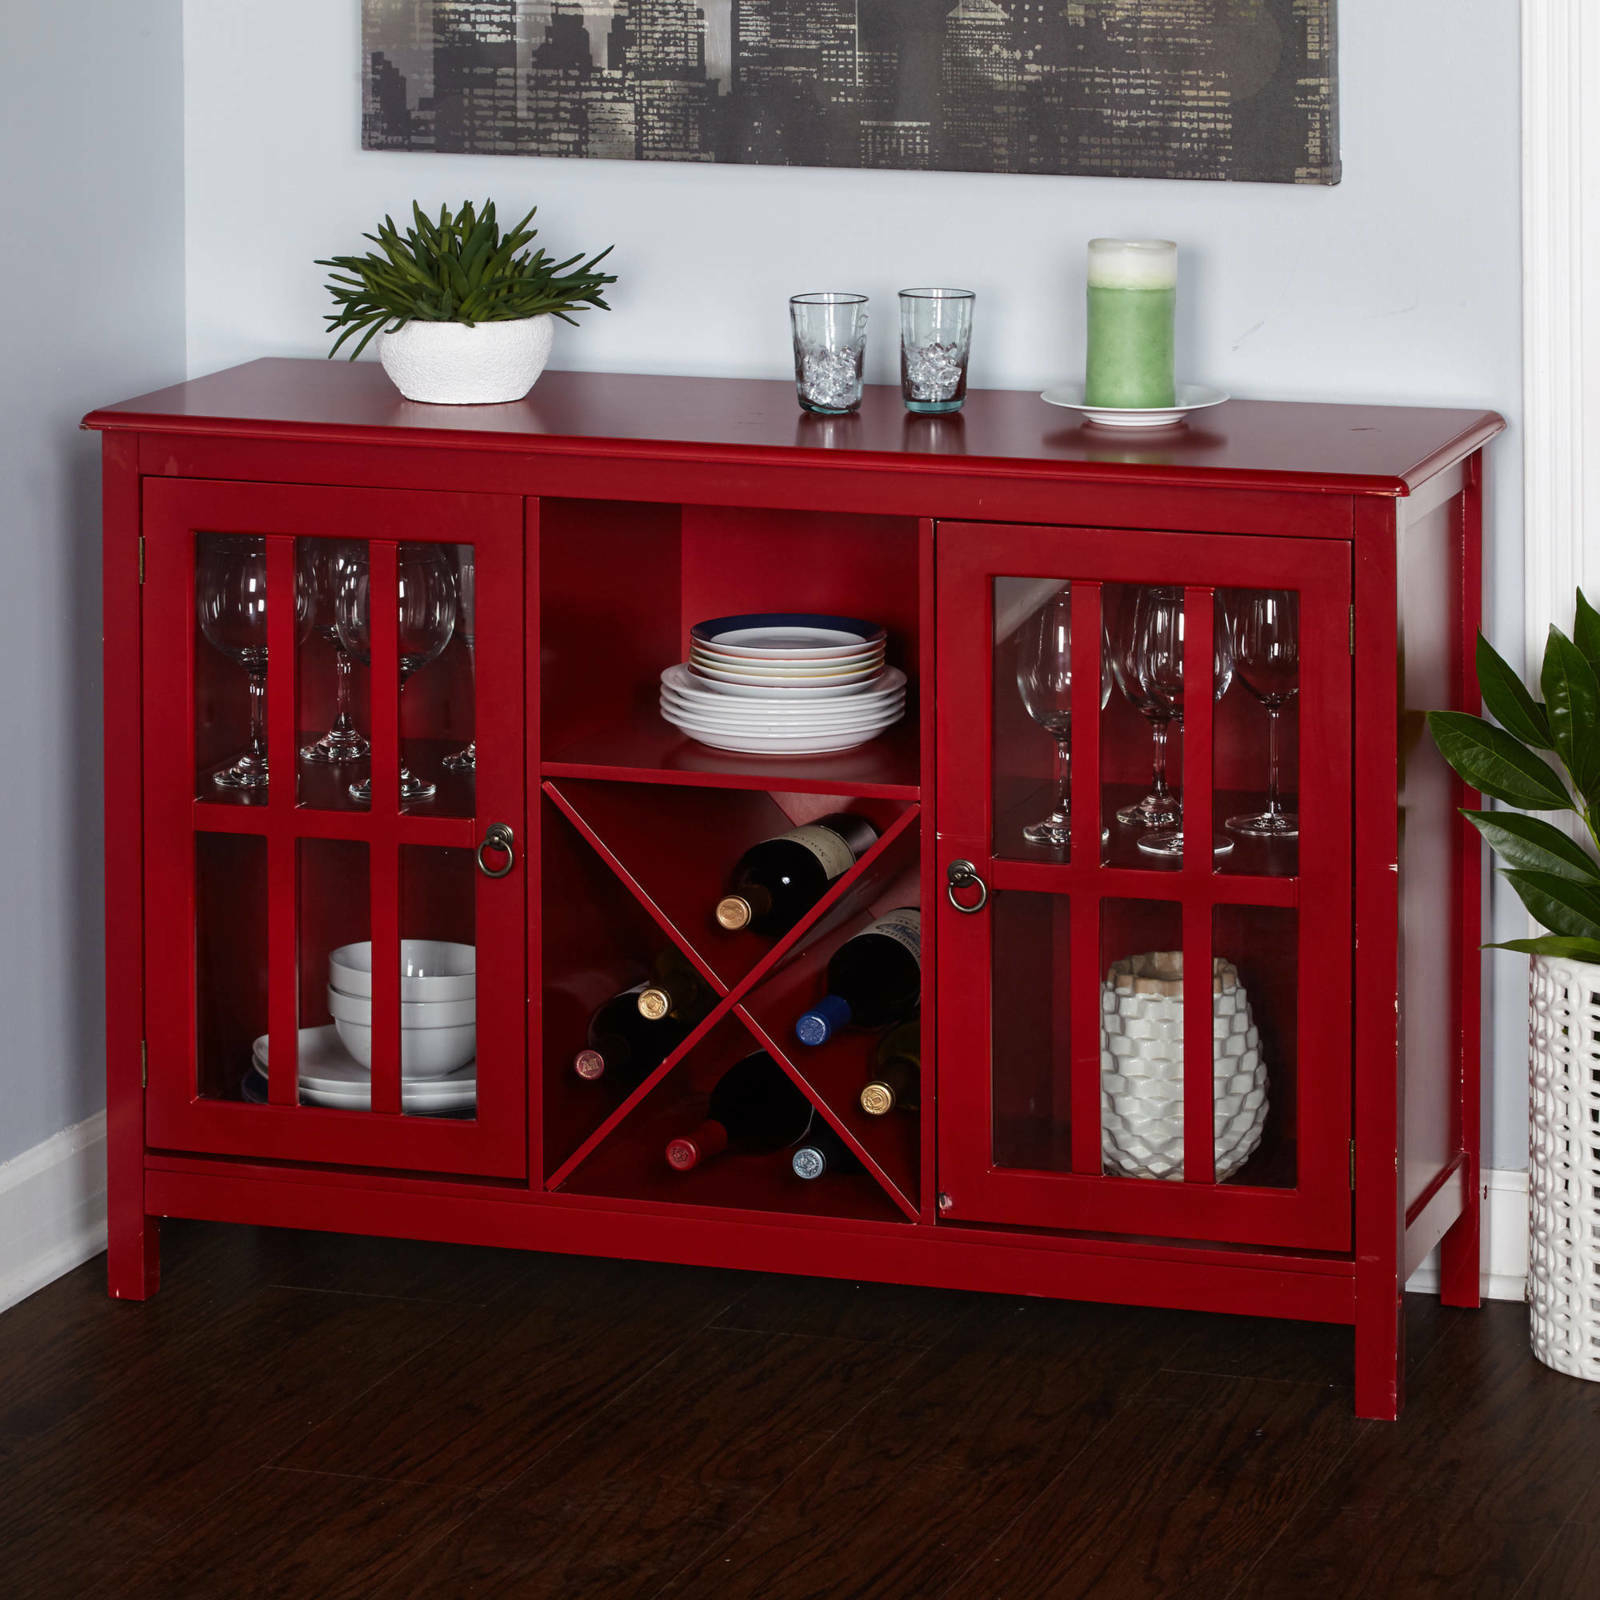 Details About Wine Buffet Sideboard Cabinet Rack Bar Plates Glasses Storage Kitchen Table Red within dimensions 1600 X 1600